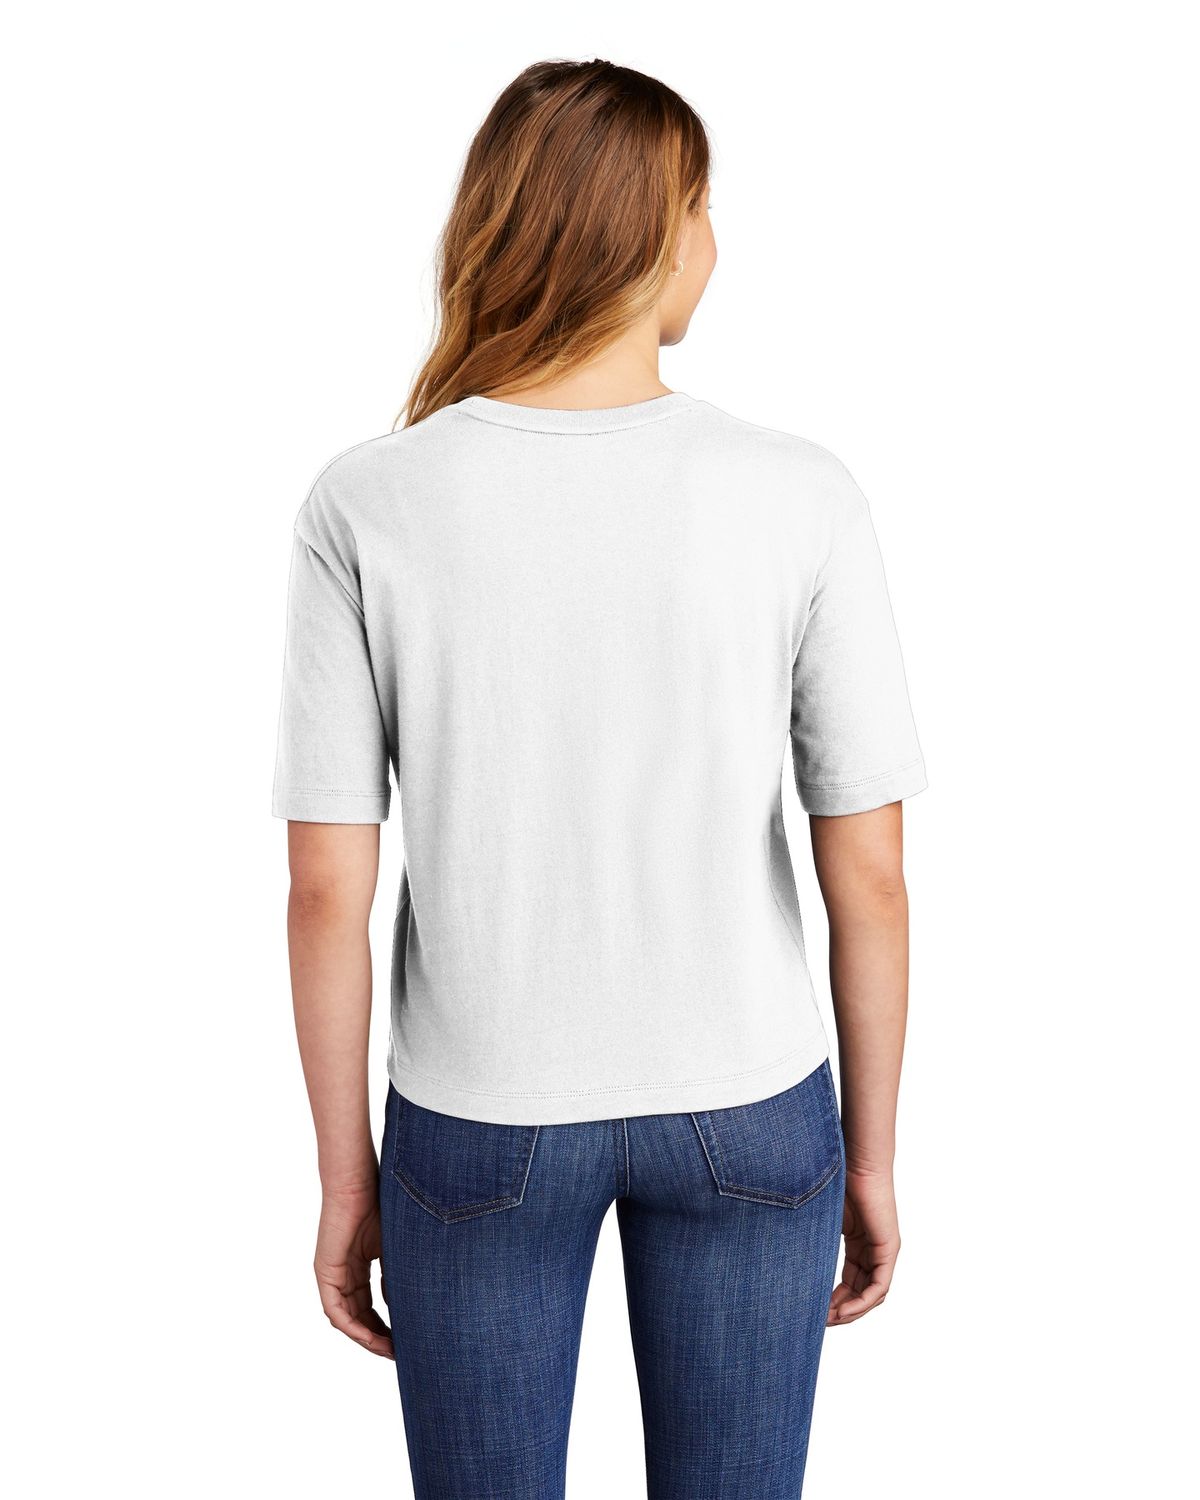 'District DT6402 Women's V.I.T.  Boxy Tee'